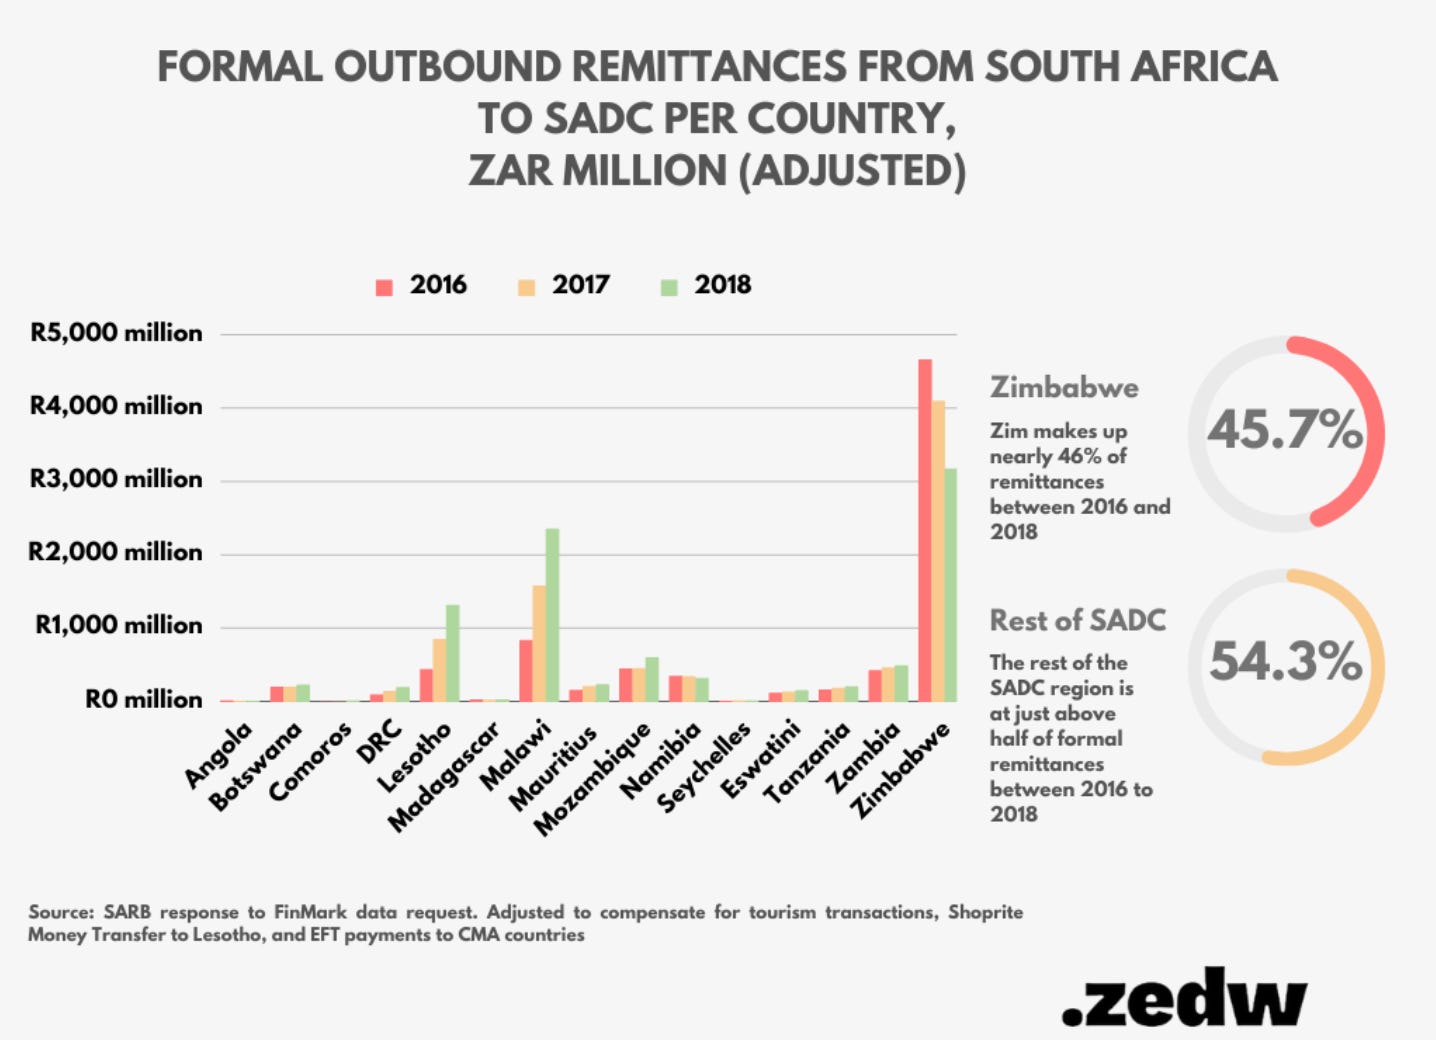 formal outbound remittances from South Africa to SADC